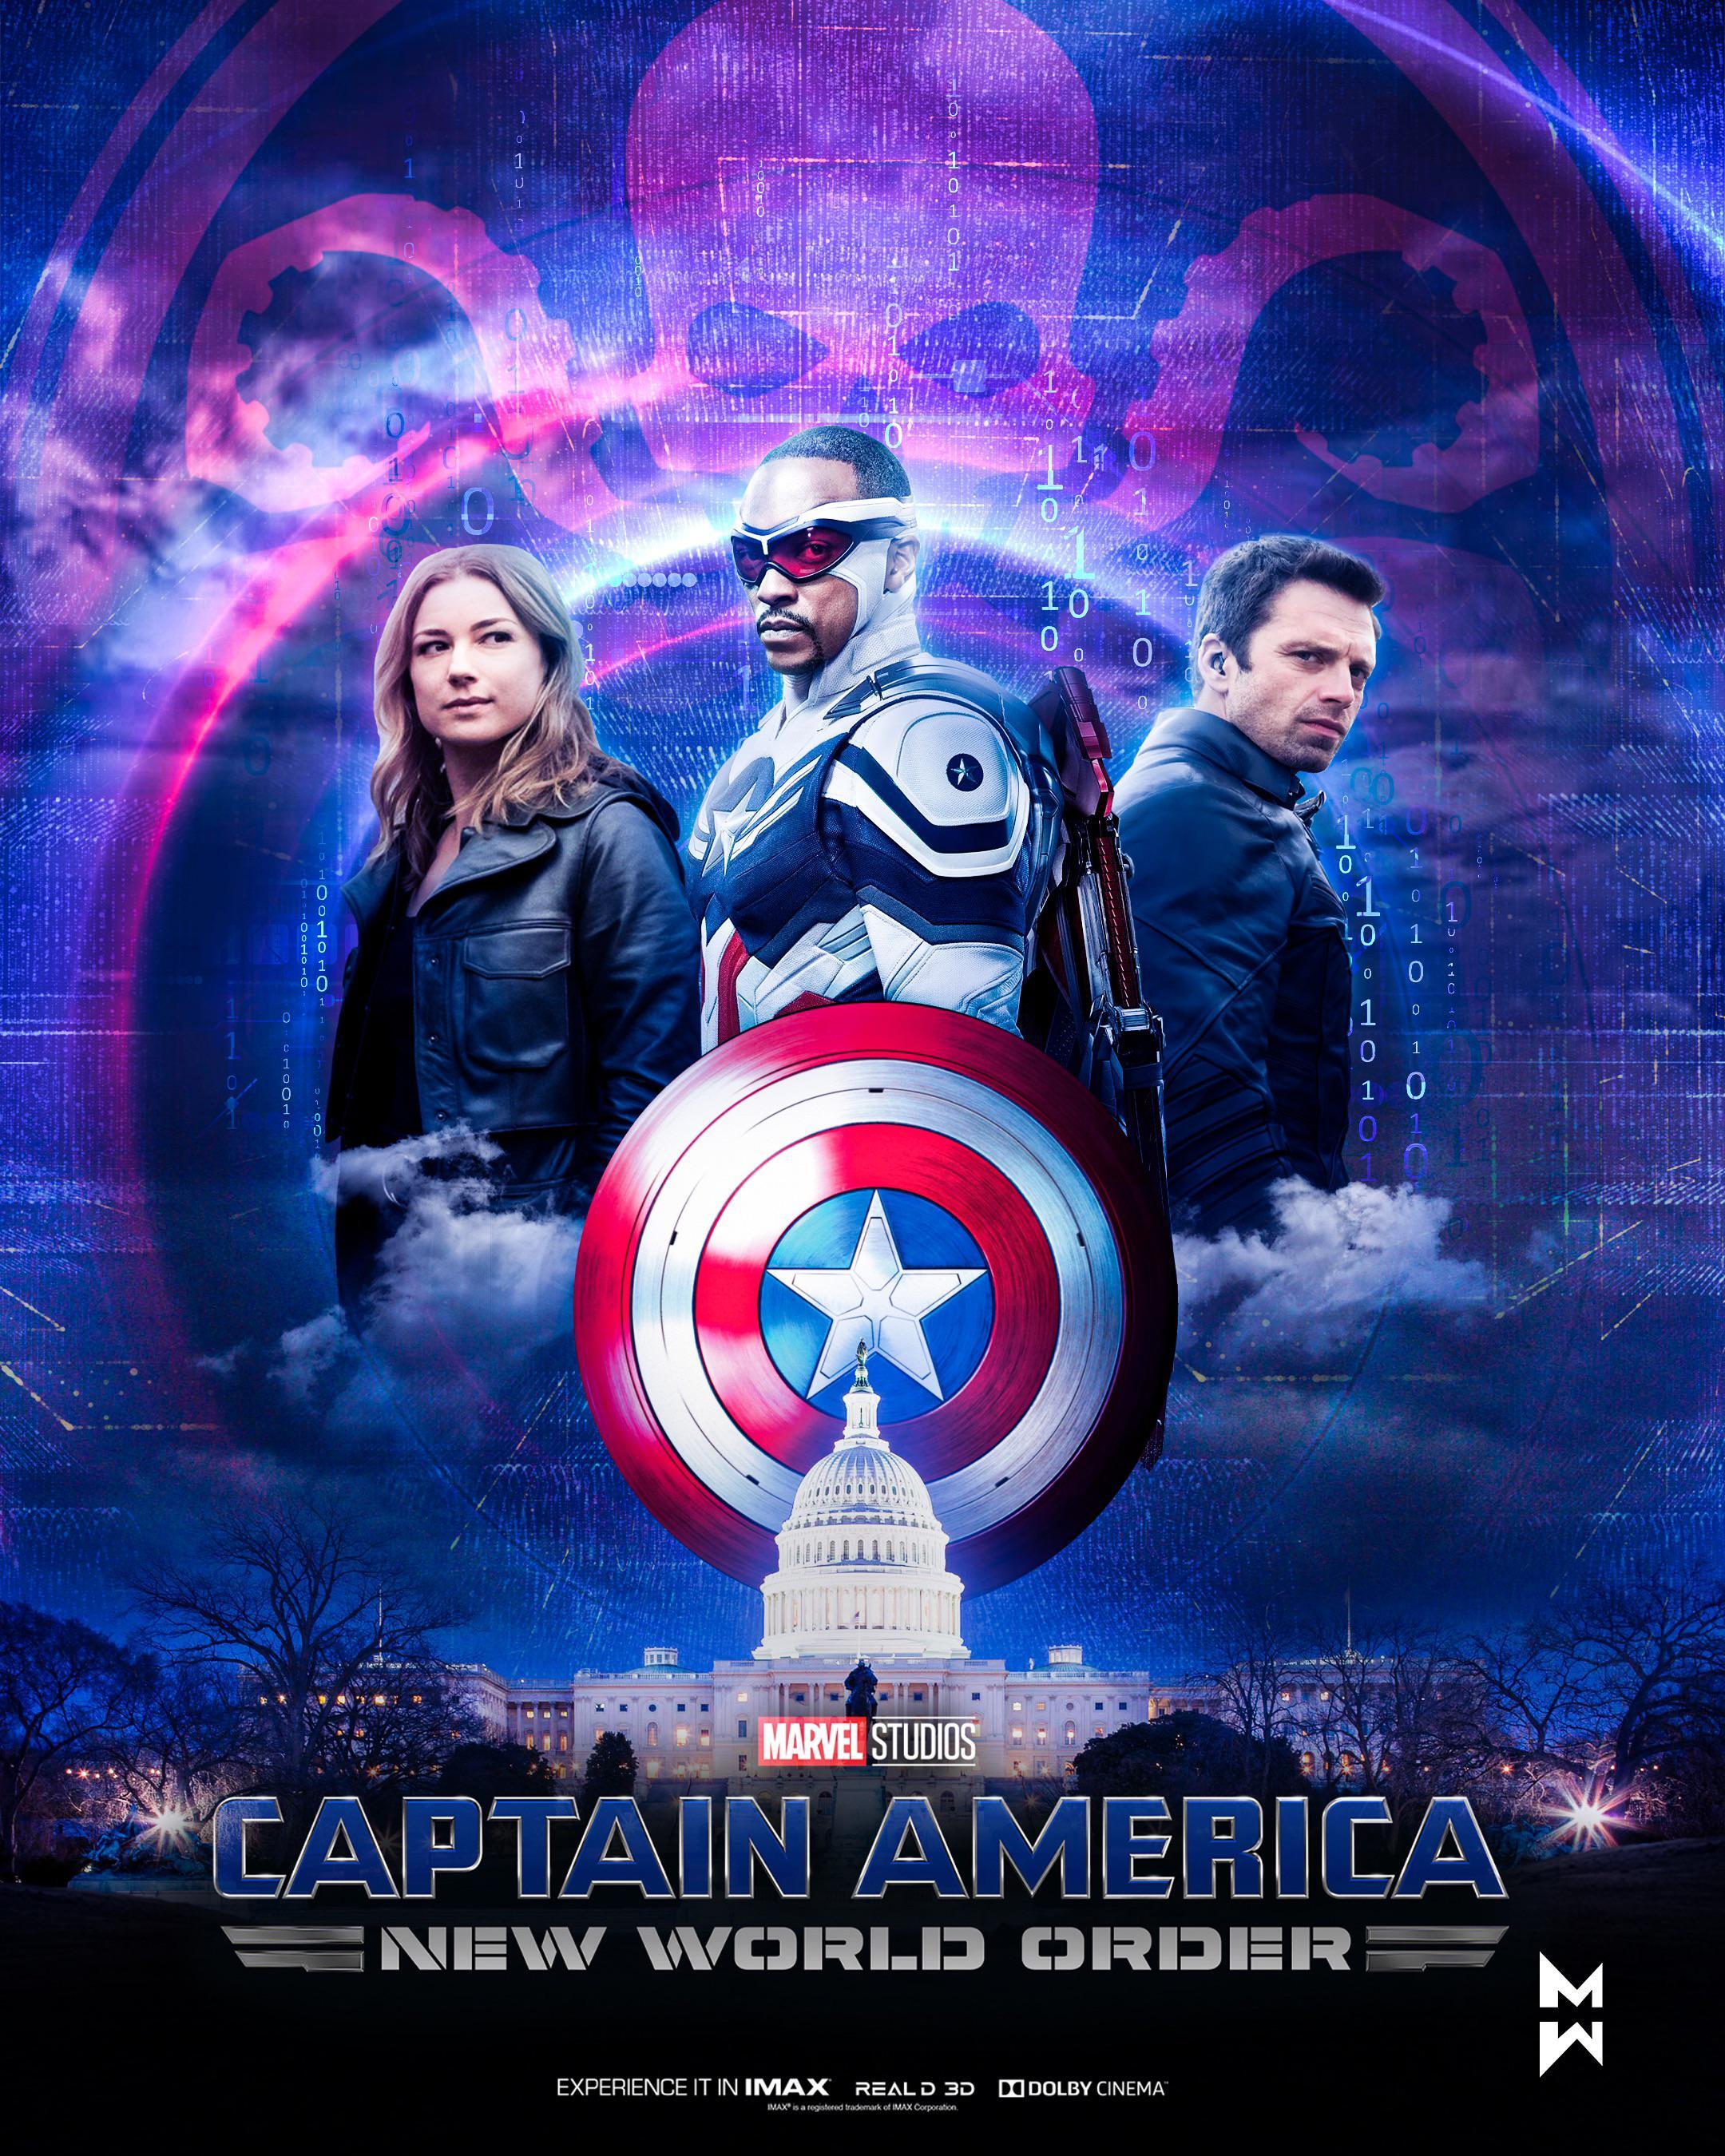 Captain America New World Order Release Date, Cast, and Reviews.